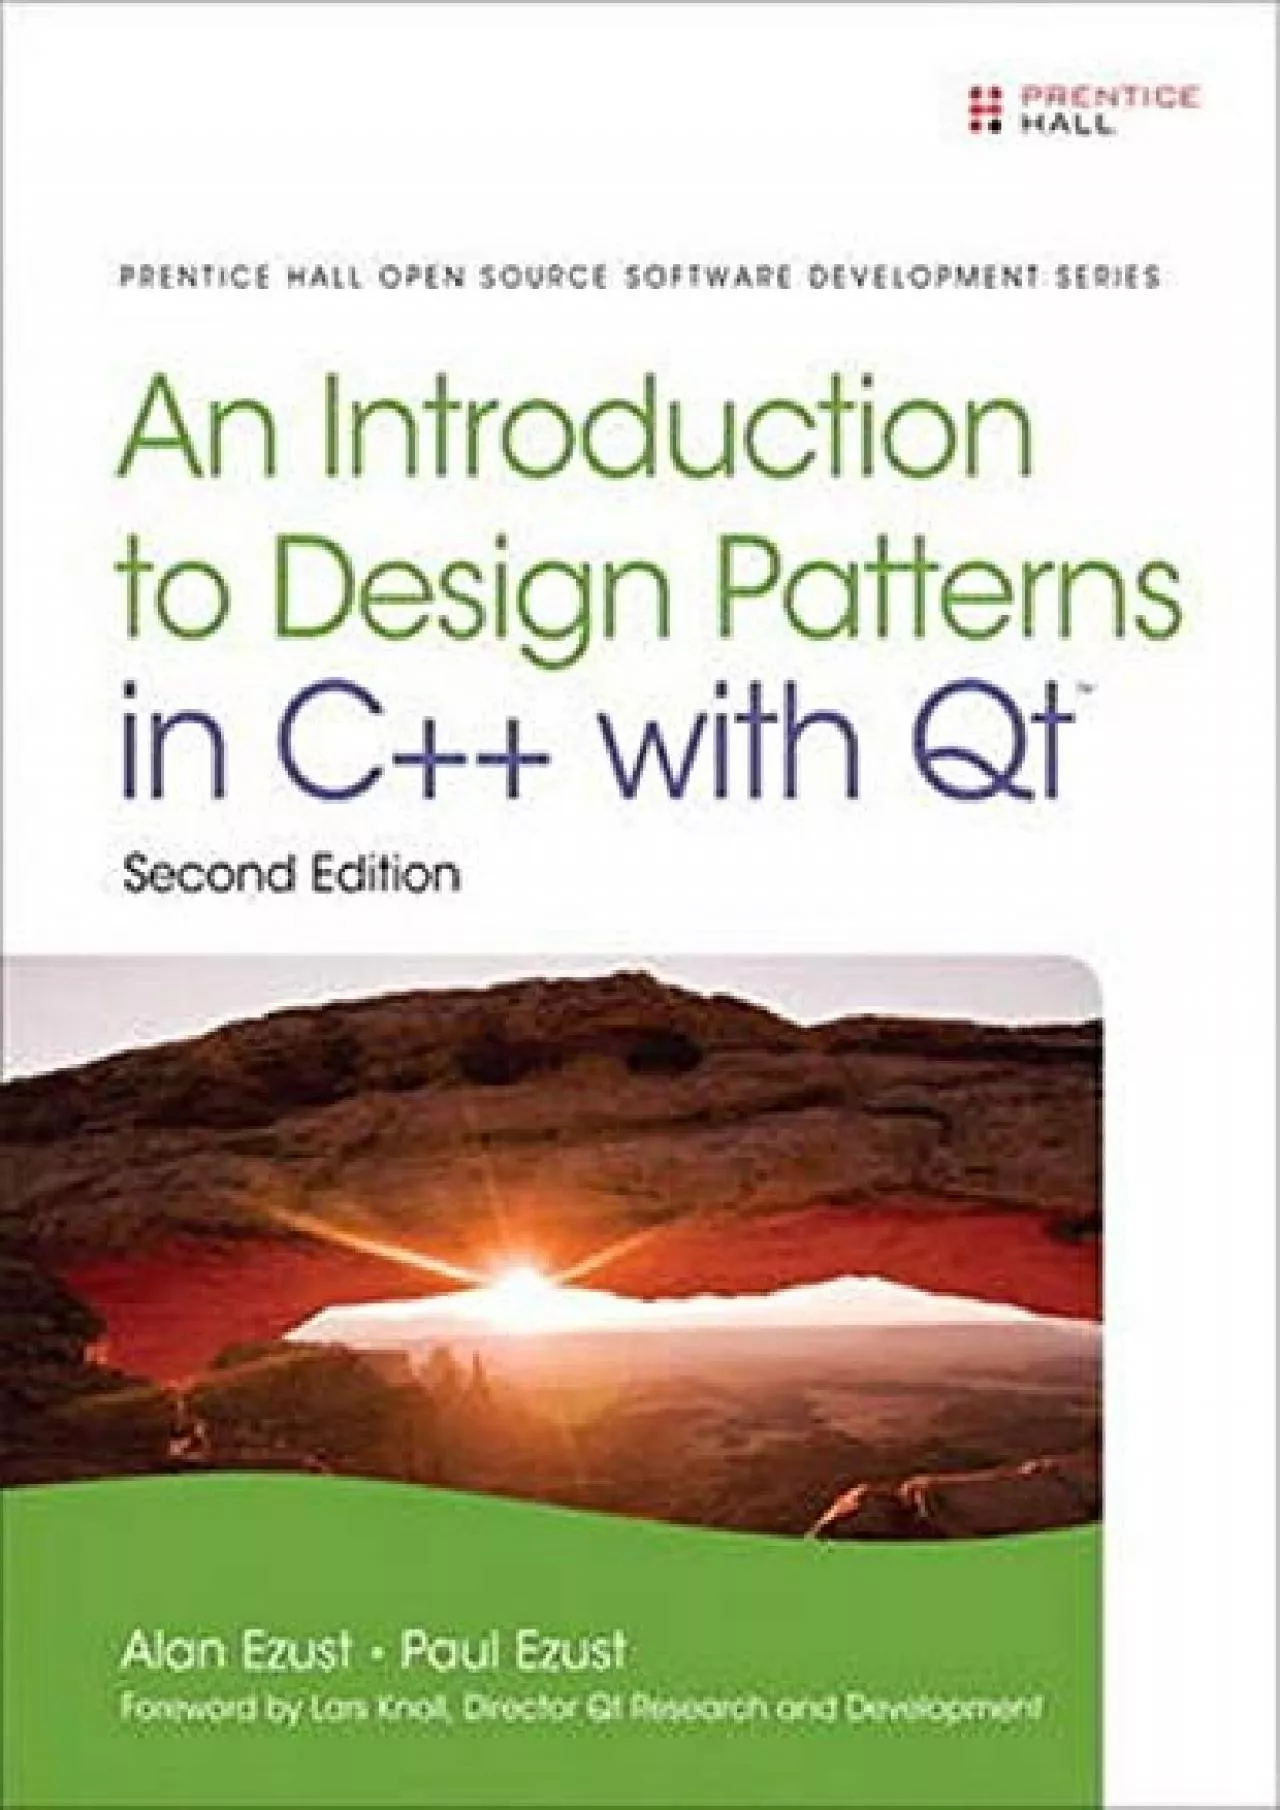 [DOWLOAD]-An Introduction to Design Patterns in C++ With Qt (Prentice Hall Open Source